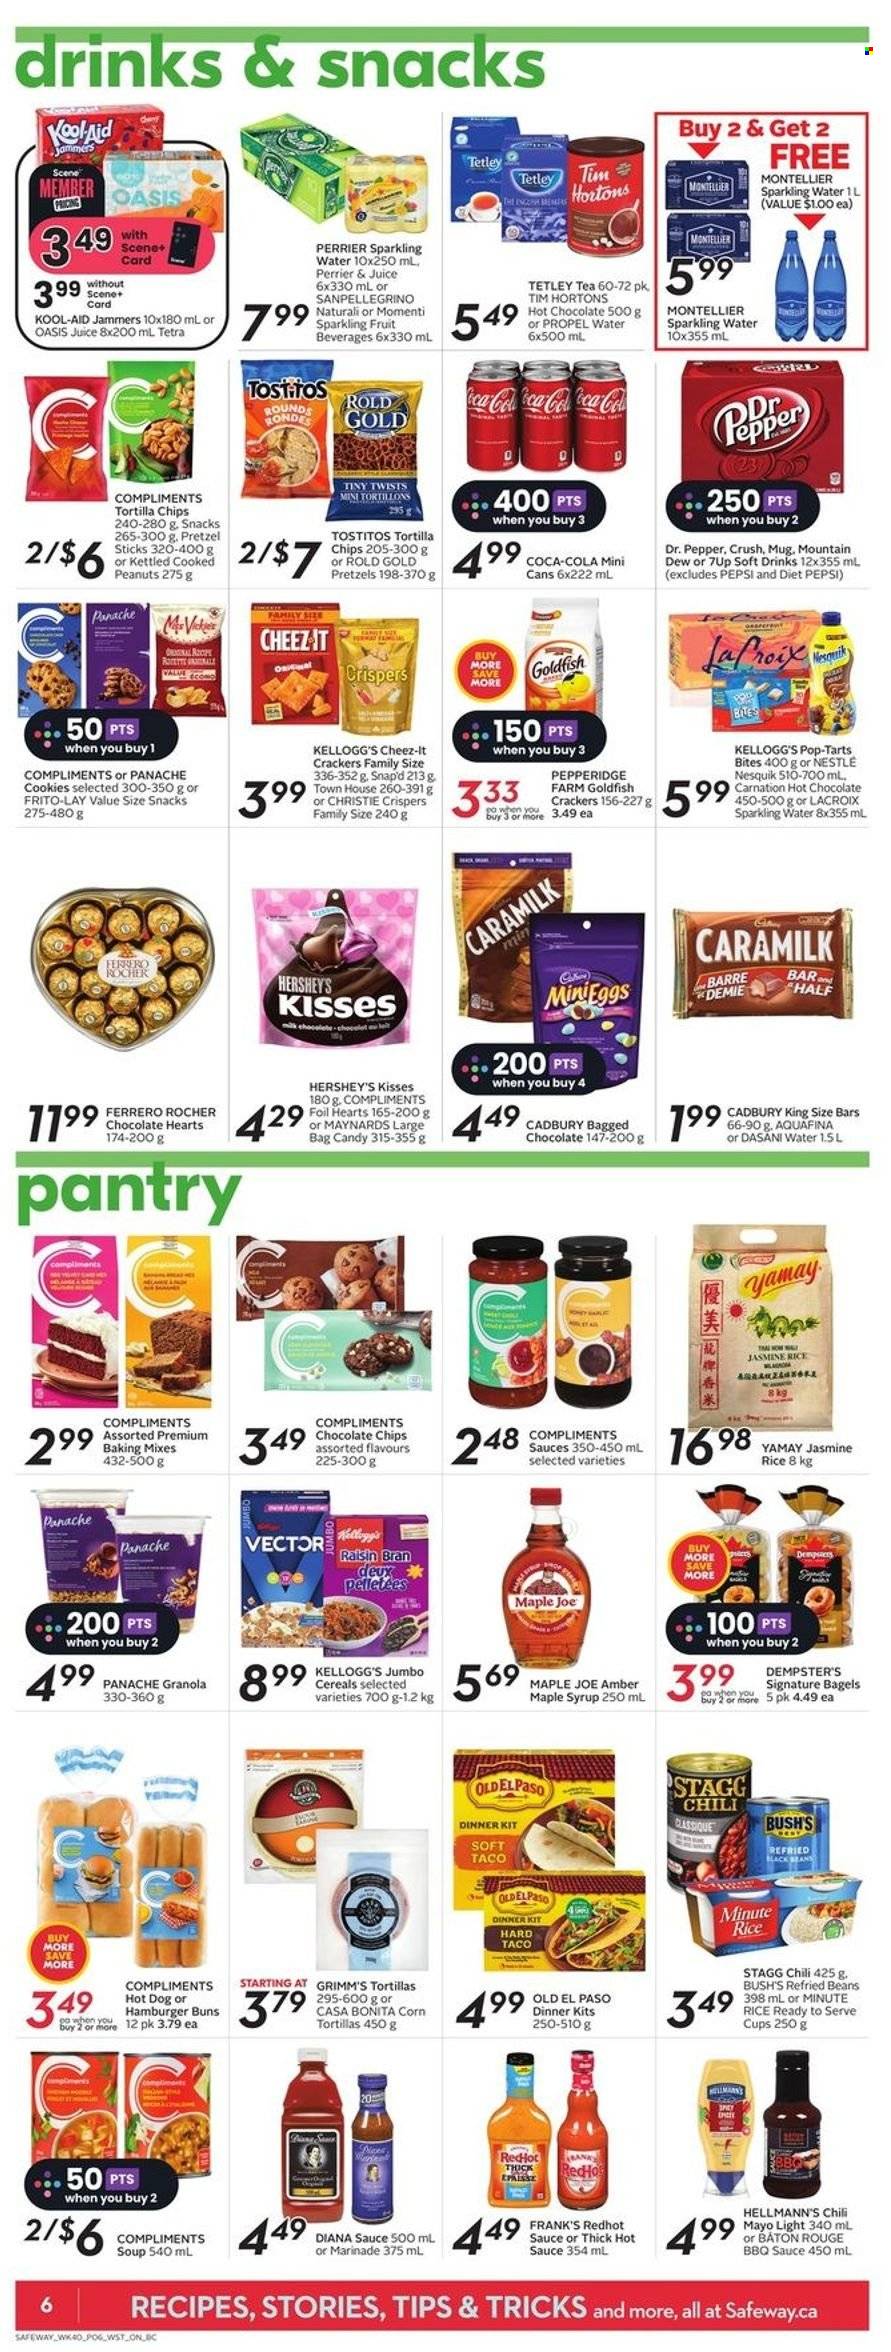 thumbnail - Safeway Flyer - February 02, 2023 - February 08, 2023 - Sales products - corn tortillas, pretzels, buns, Old El Paso, burger buns, beans, hot dog, soup, dinner kit, milk, mayonnaise, Hellmann’s, Hershey's, cookies, crackers, Kellogg's, Cadbury, Pop-Tarts, tortilla chips, Goldfish, Frito-Lay, Cheez-It, Tostitos, baking mix, refried beans, cereals, Raisin Bran, rice, jasmine rice, BBQ sauce, hot sauce, marinade, maple syrup, syrup, peanuts, Coca-Cola, Mountain Dew, Pepsi, juice, Dr. Pepper, Diet Pepsi, soft drink, 7UP, Perrier, Aquafina, sparkling water, hot chocolate, tea, granola, kool aid, Nestlé, Ferrero Rocher, Nesquik. Page 7.